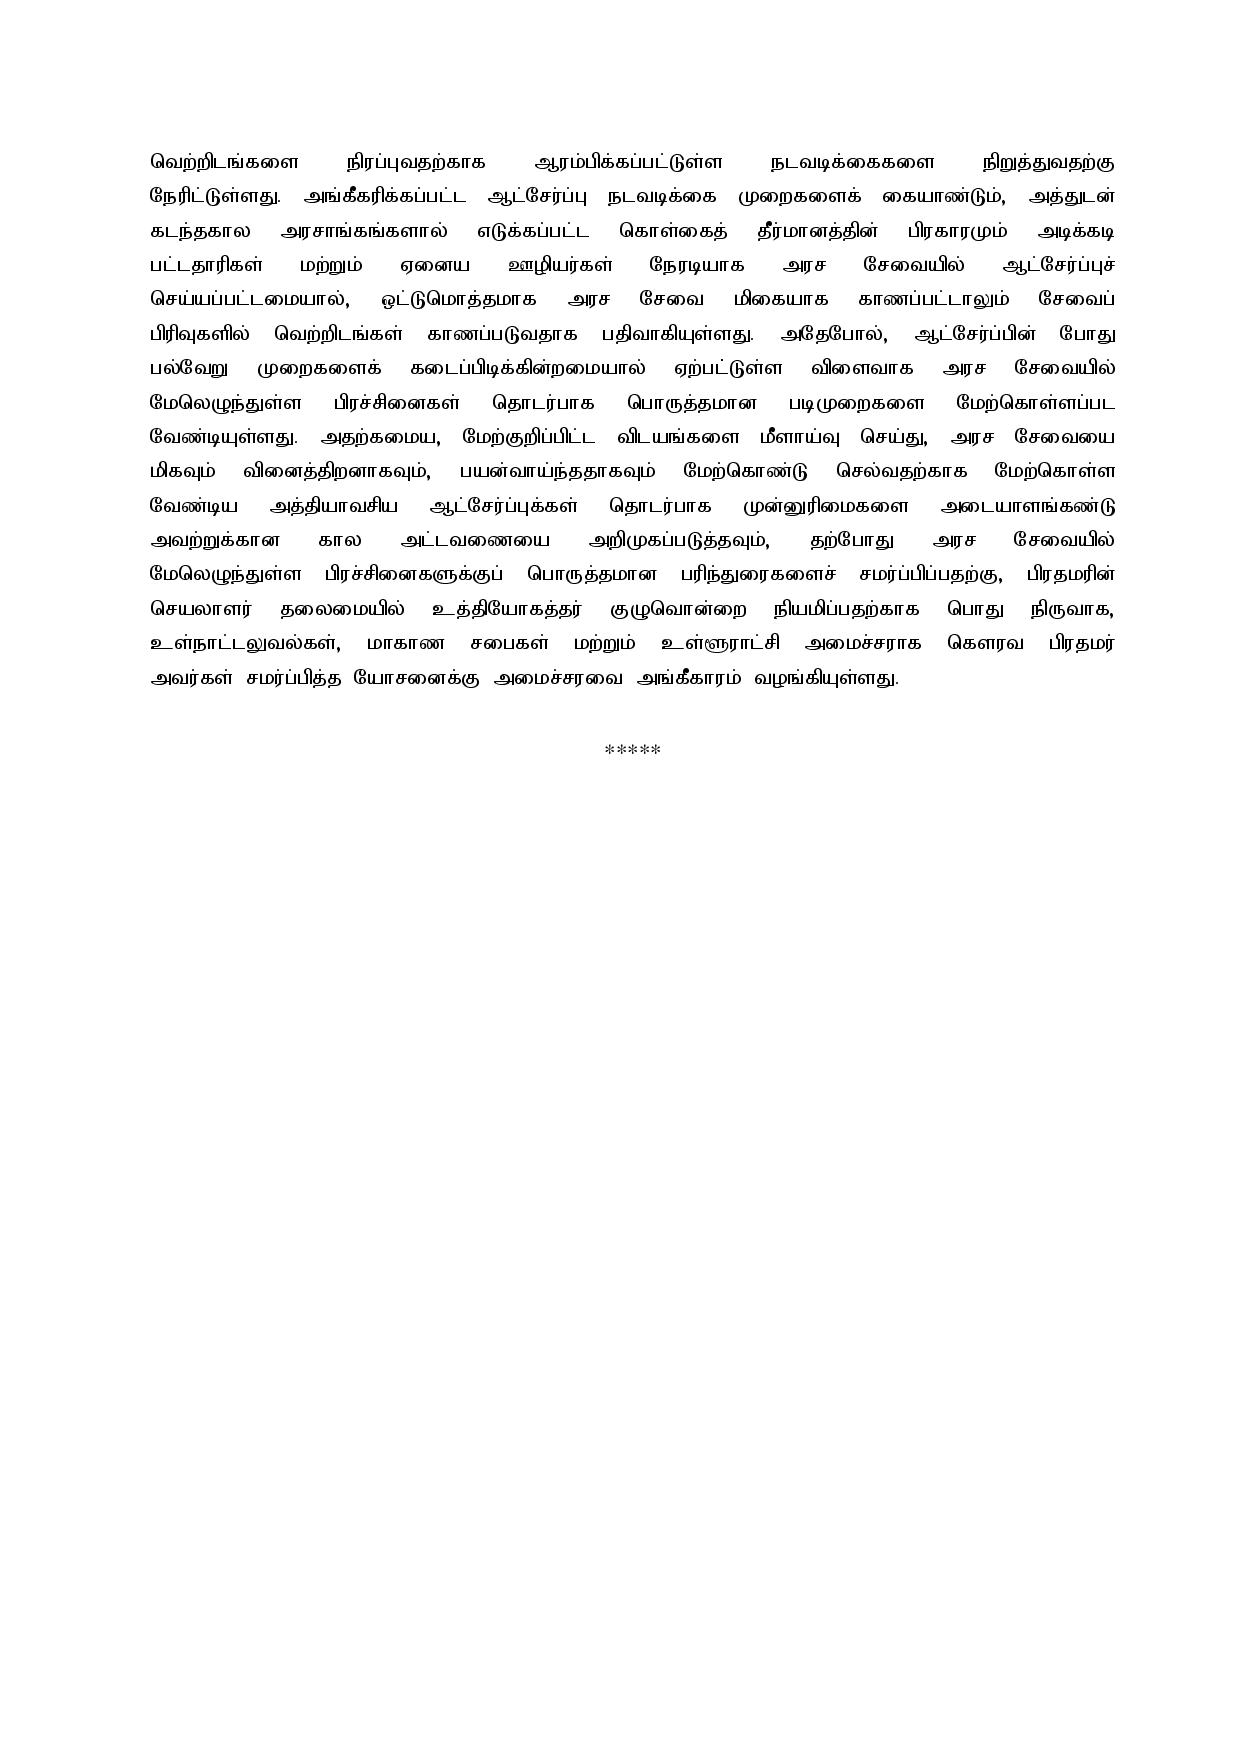 Cabinet Decisions on 12.09.2022 Tamil page 003